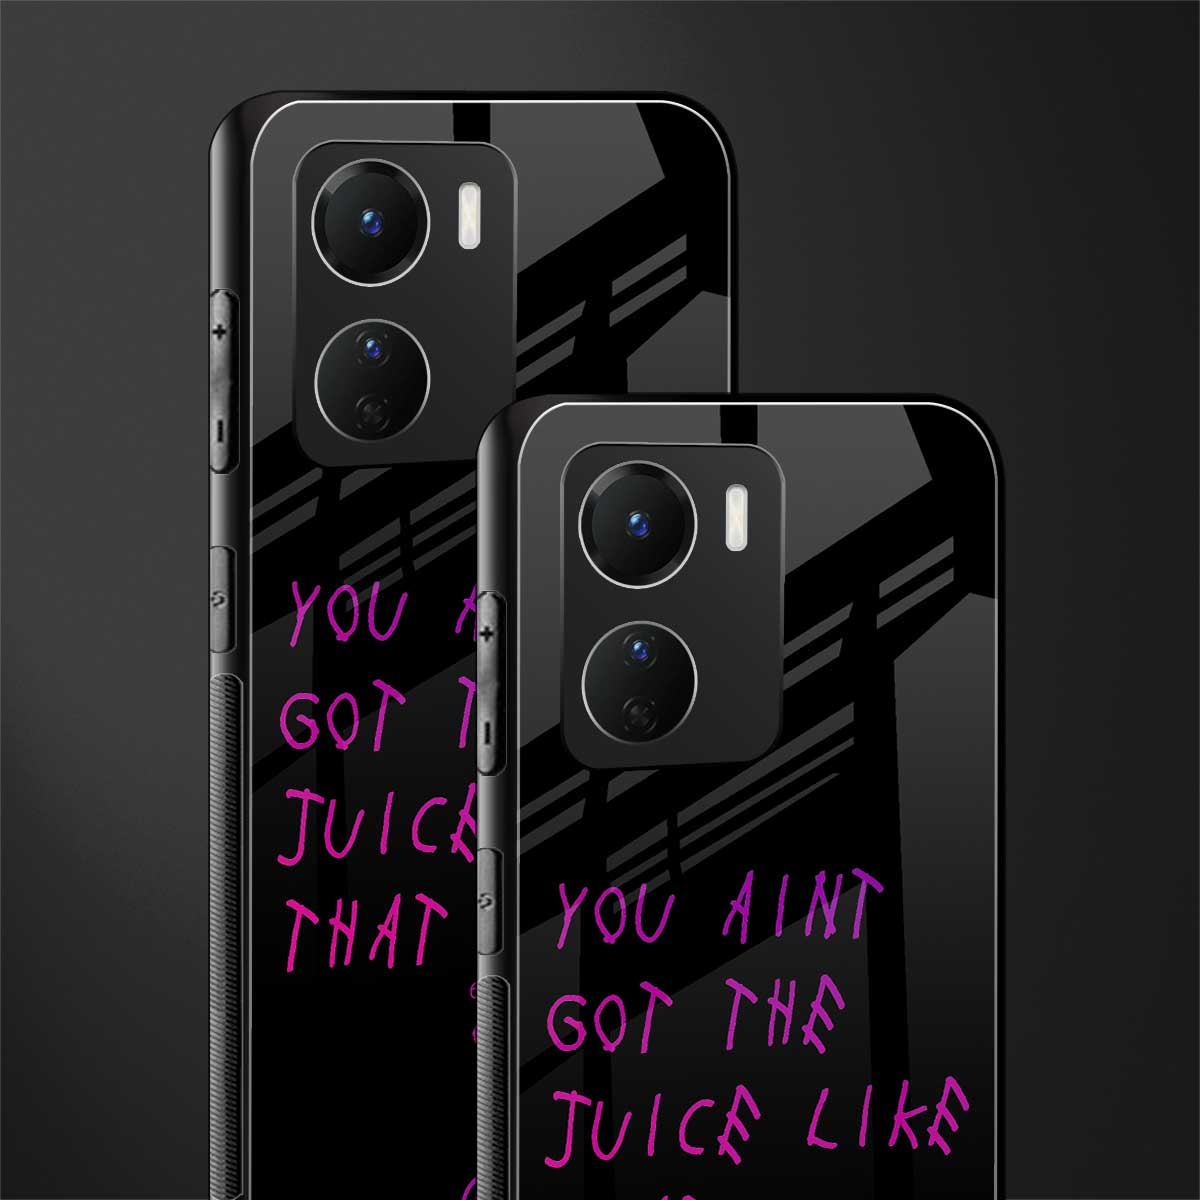 ain't got the juice black edition back phone cover | glass case for vivo y16